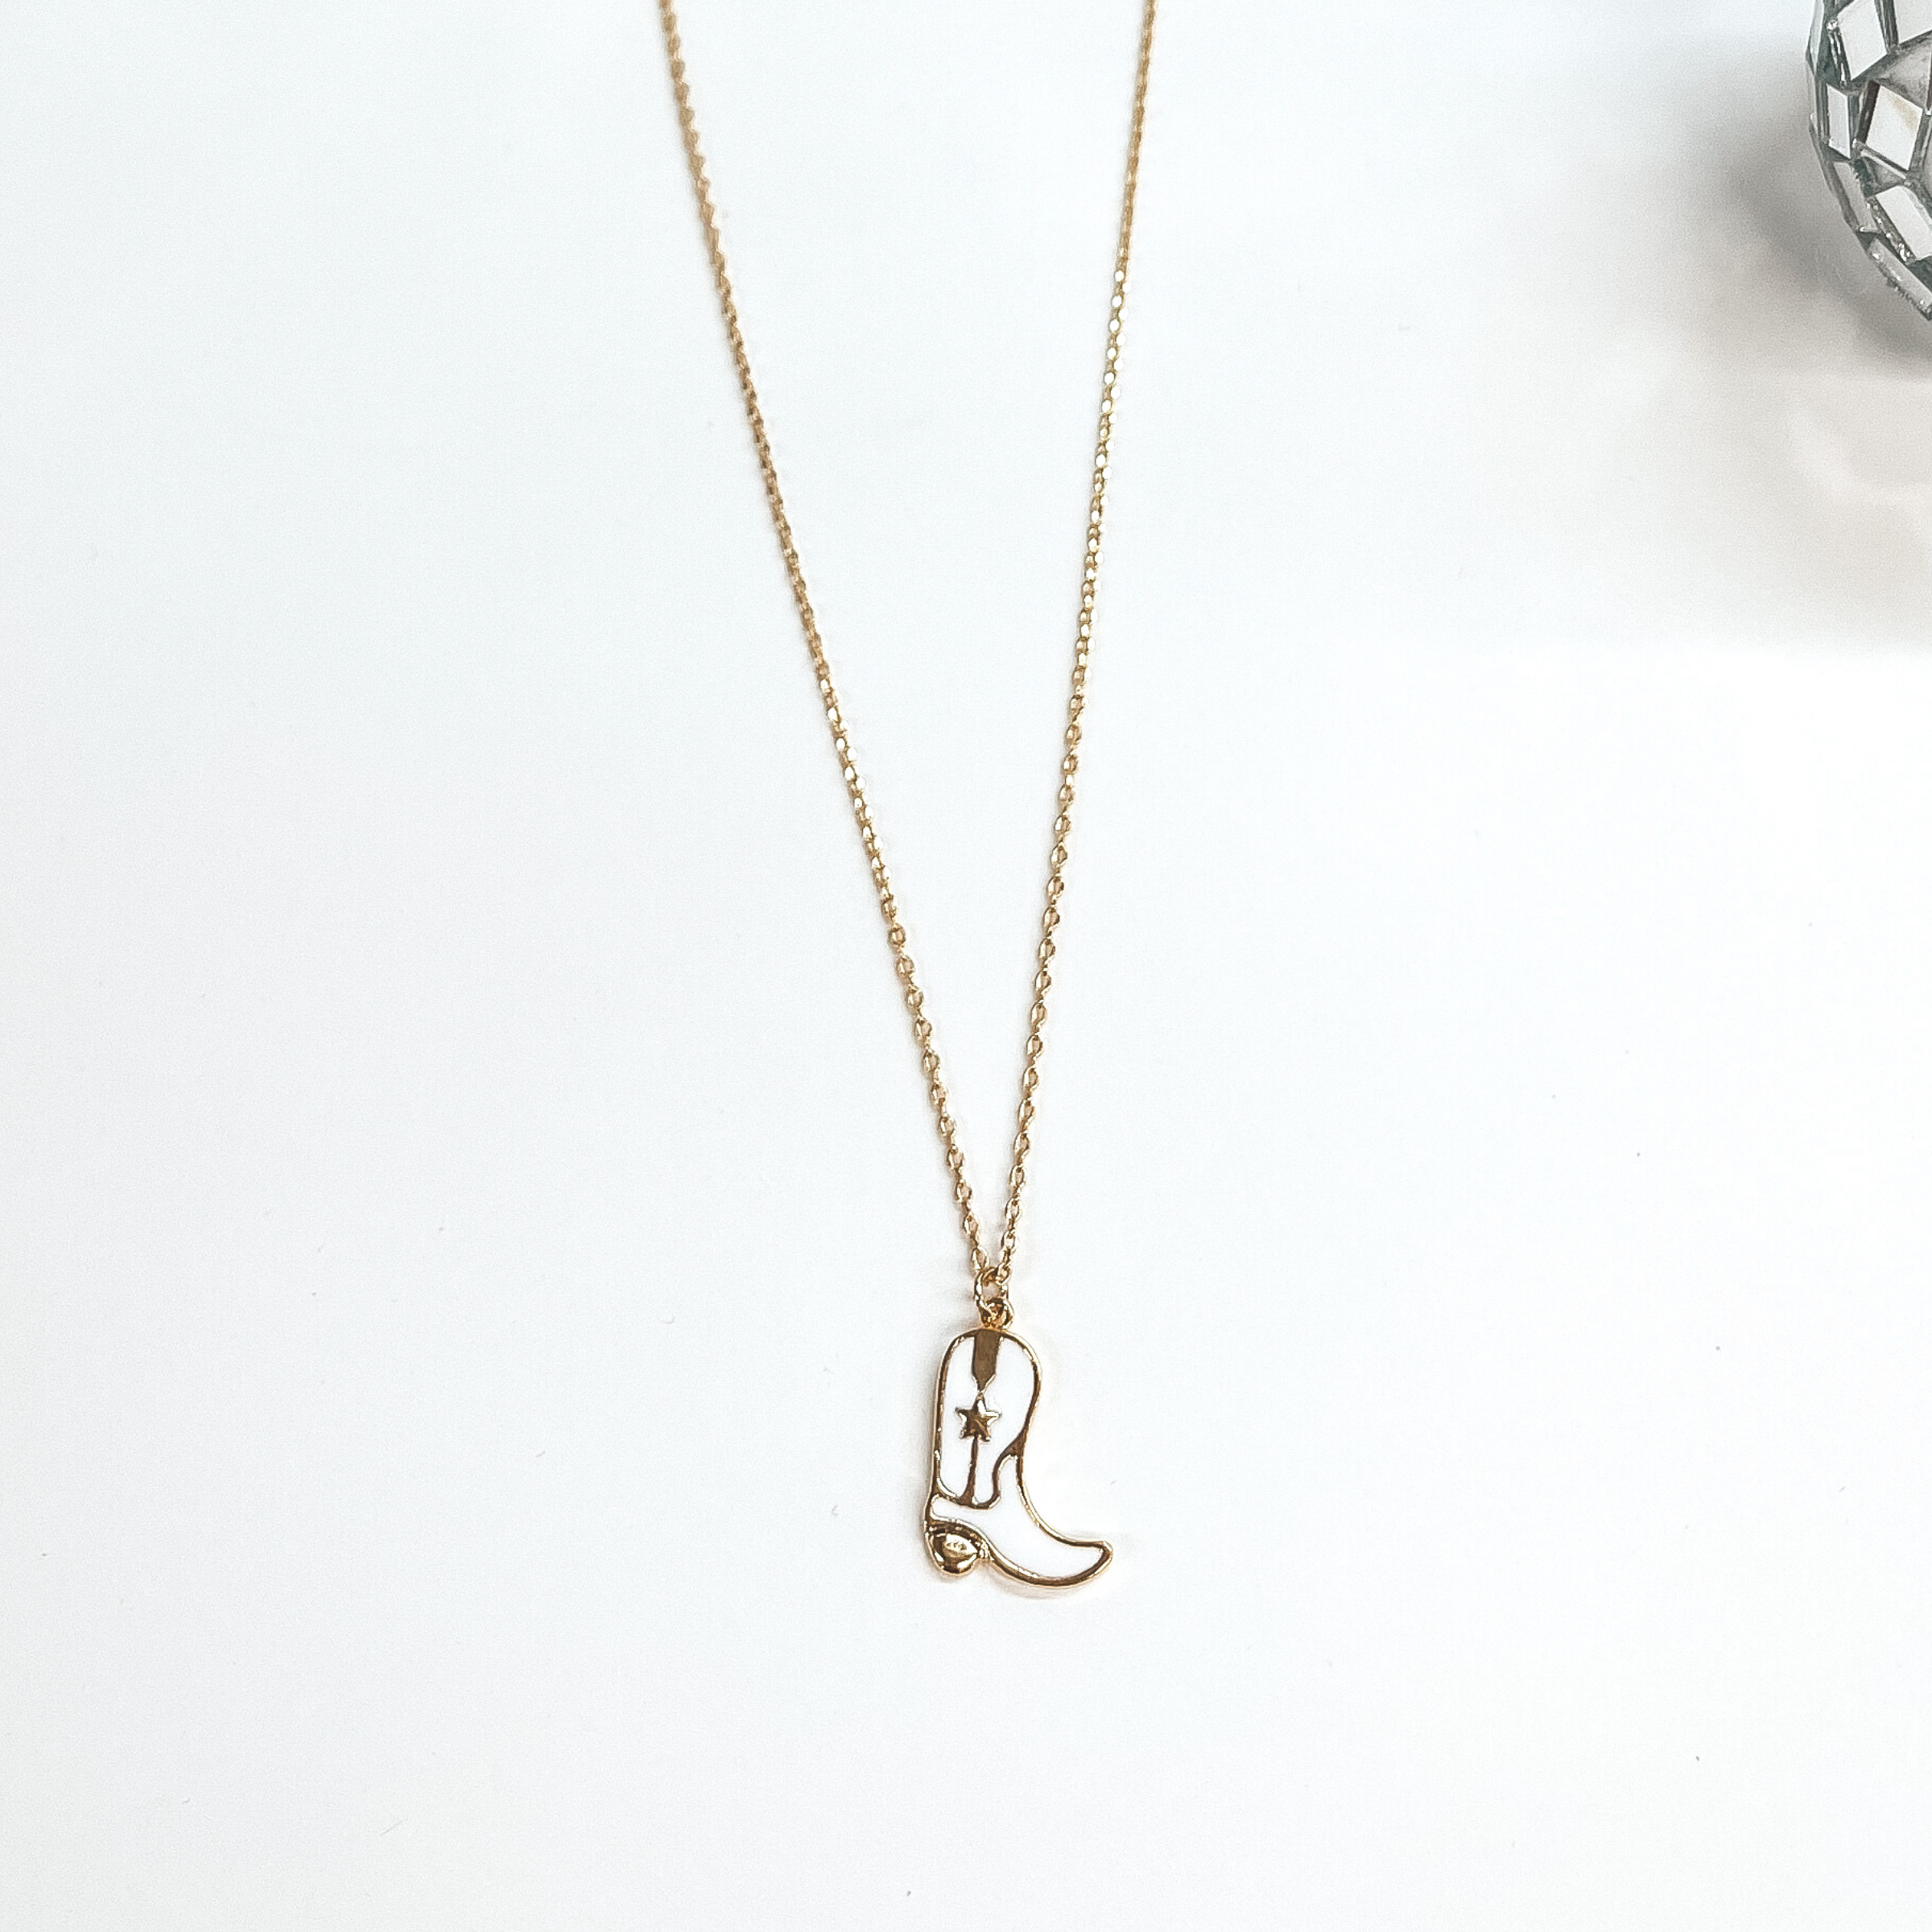 Take Me to Nashville Gold Necklace with Boot Pendant in White - Giddy Up Glamour Boutique